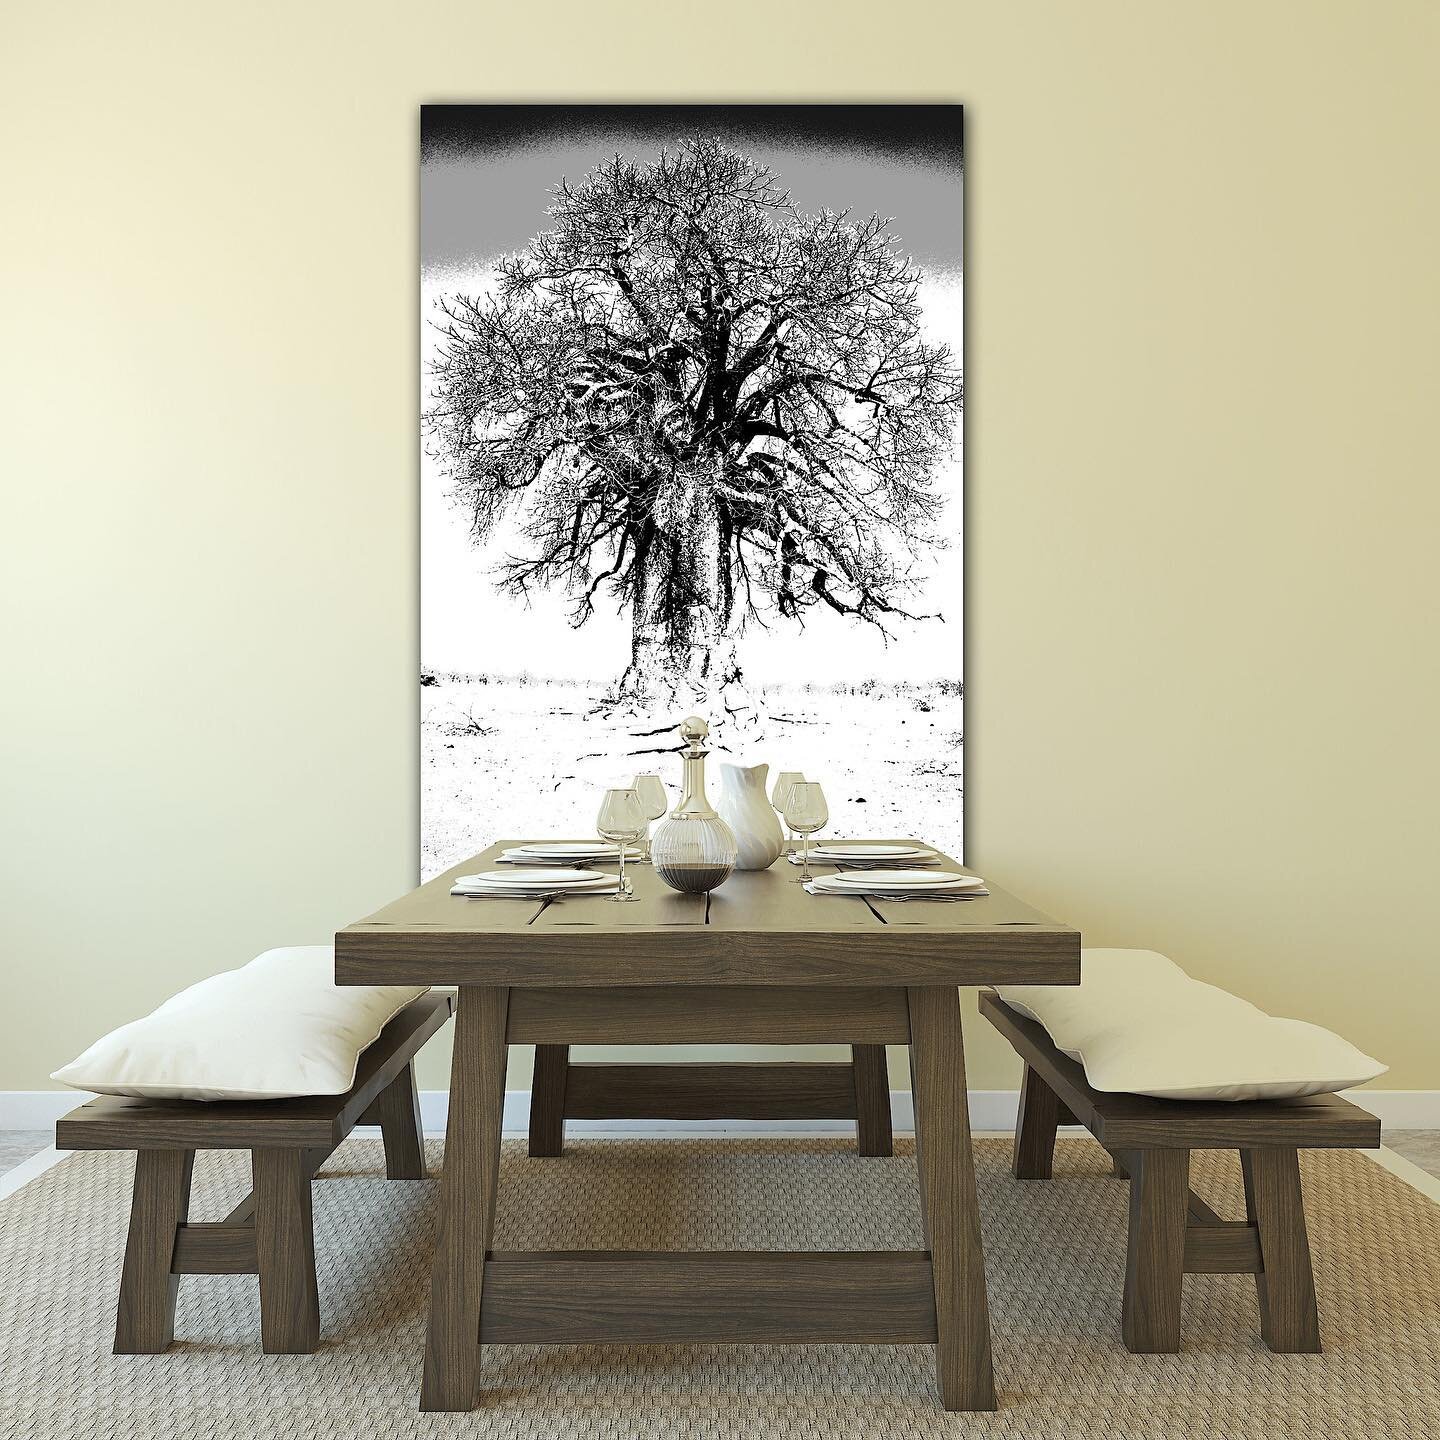 Standing strong.

Imagine your family around this table and a giant piece of art that reminds you of how important our connection to nature is, how we&rsquo;re all a significant part of a big beautiful life, interconnected in an inextricable way.

In